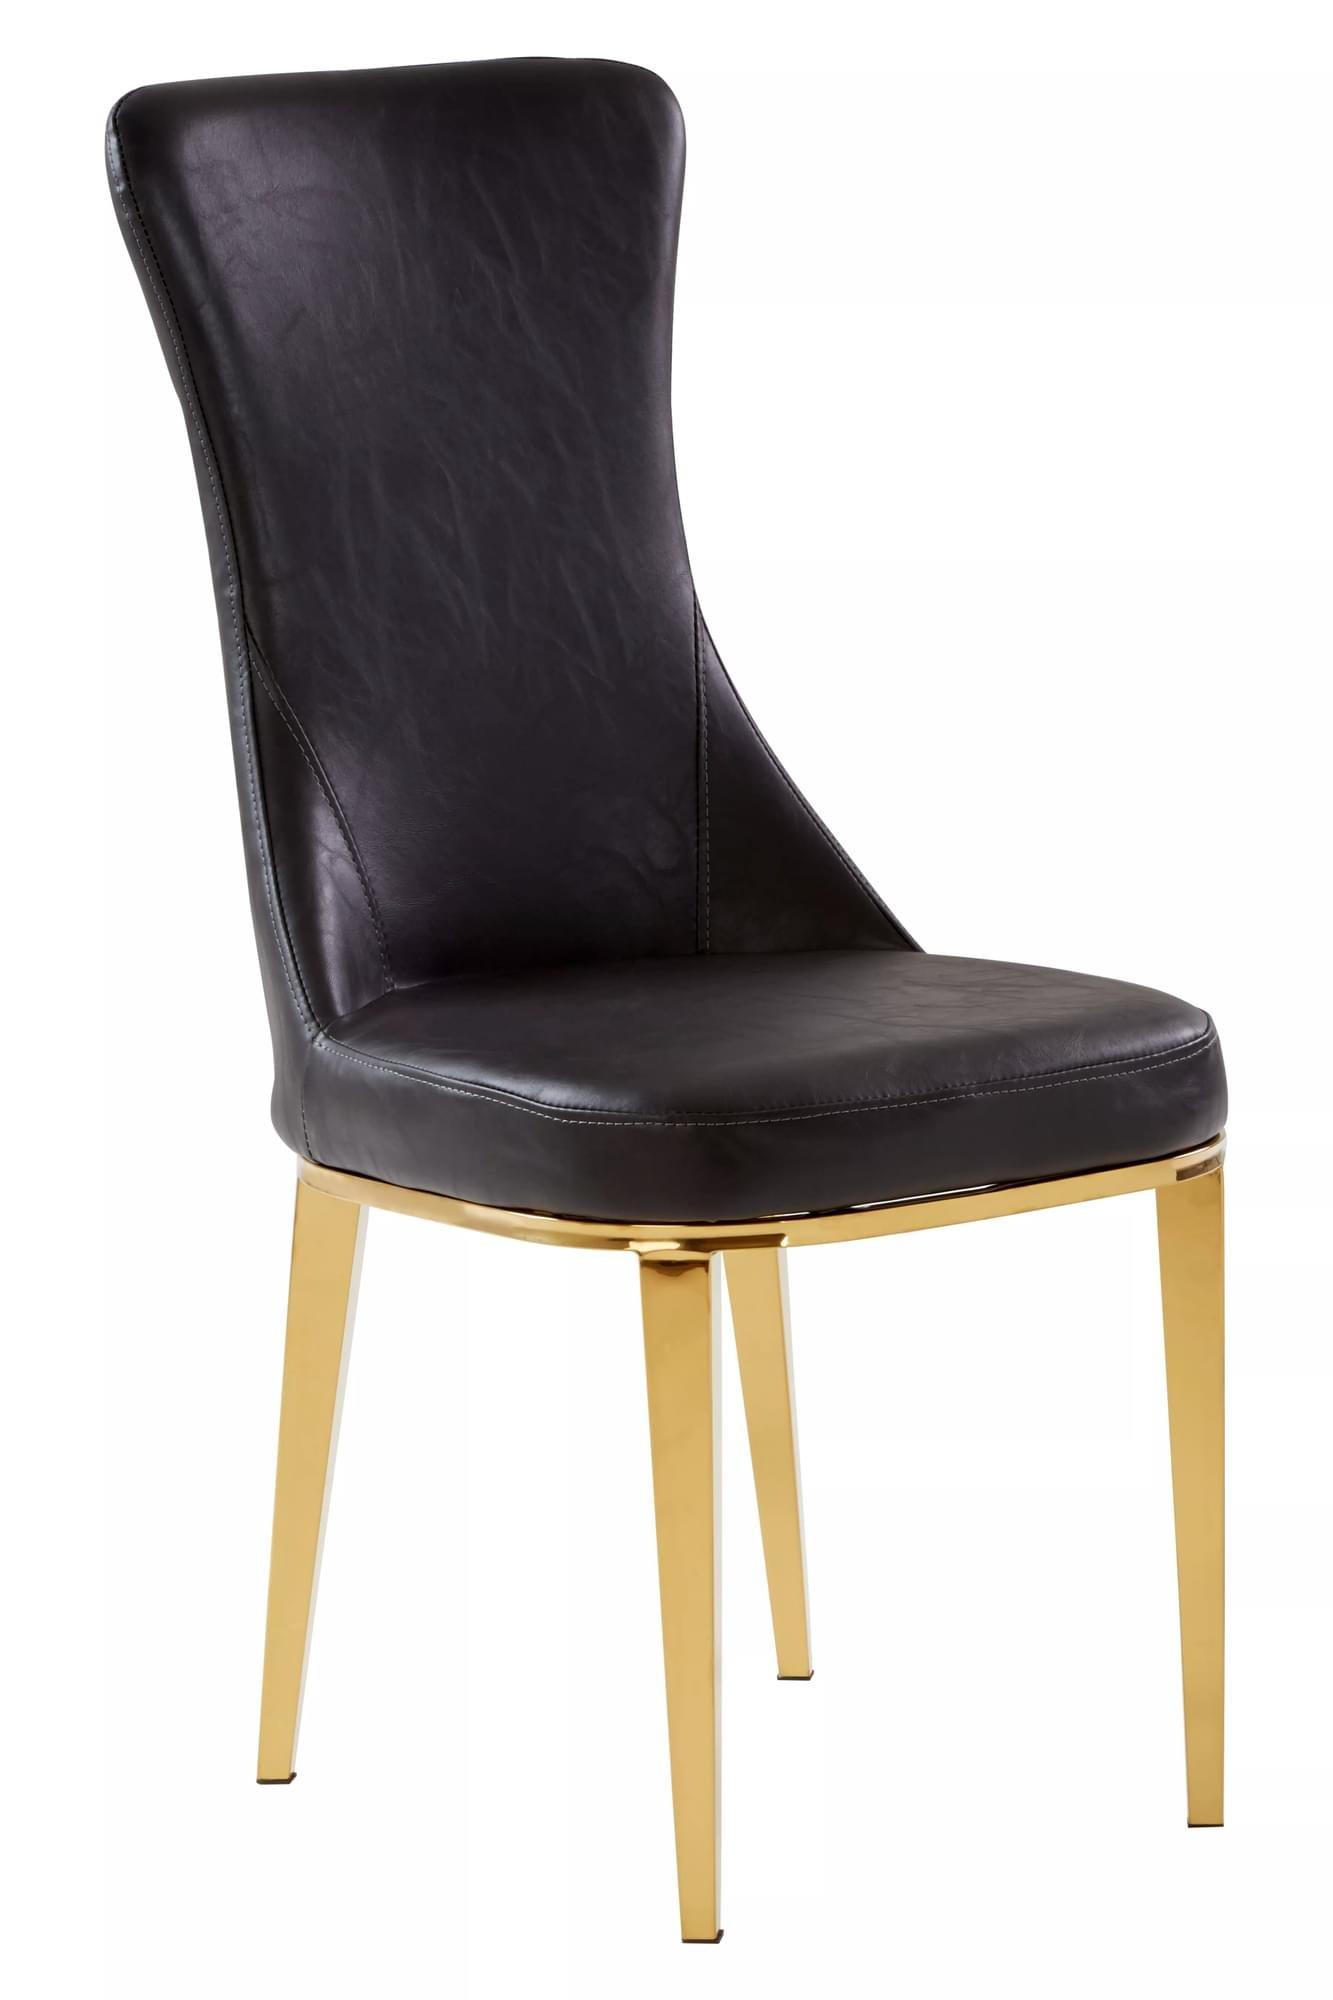 Interiors by Premier Forli Black Dining Chair